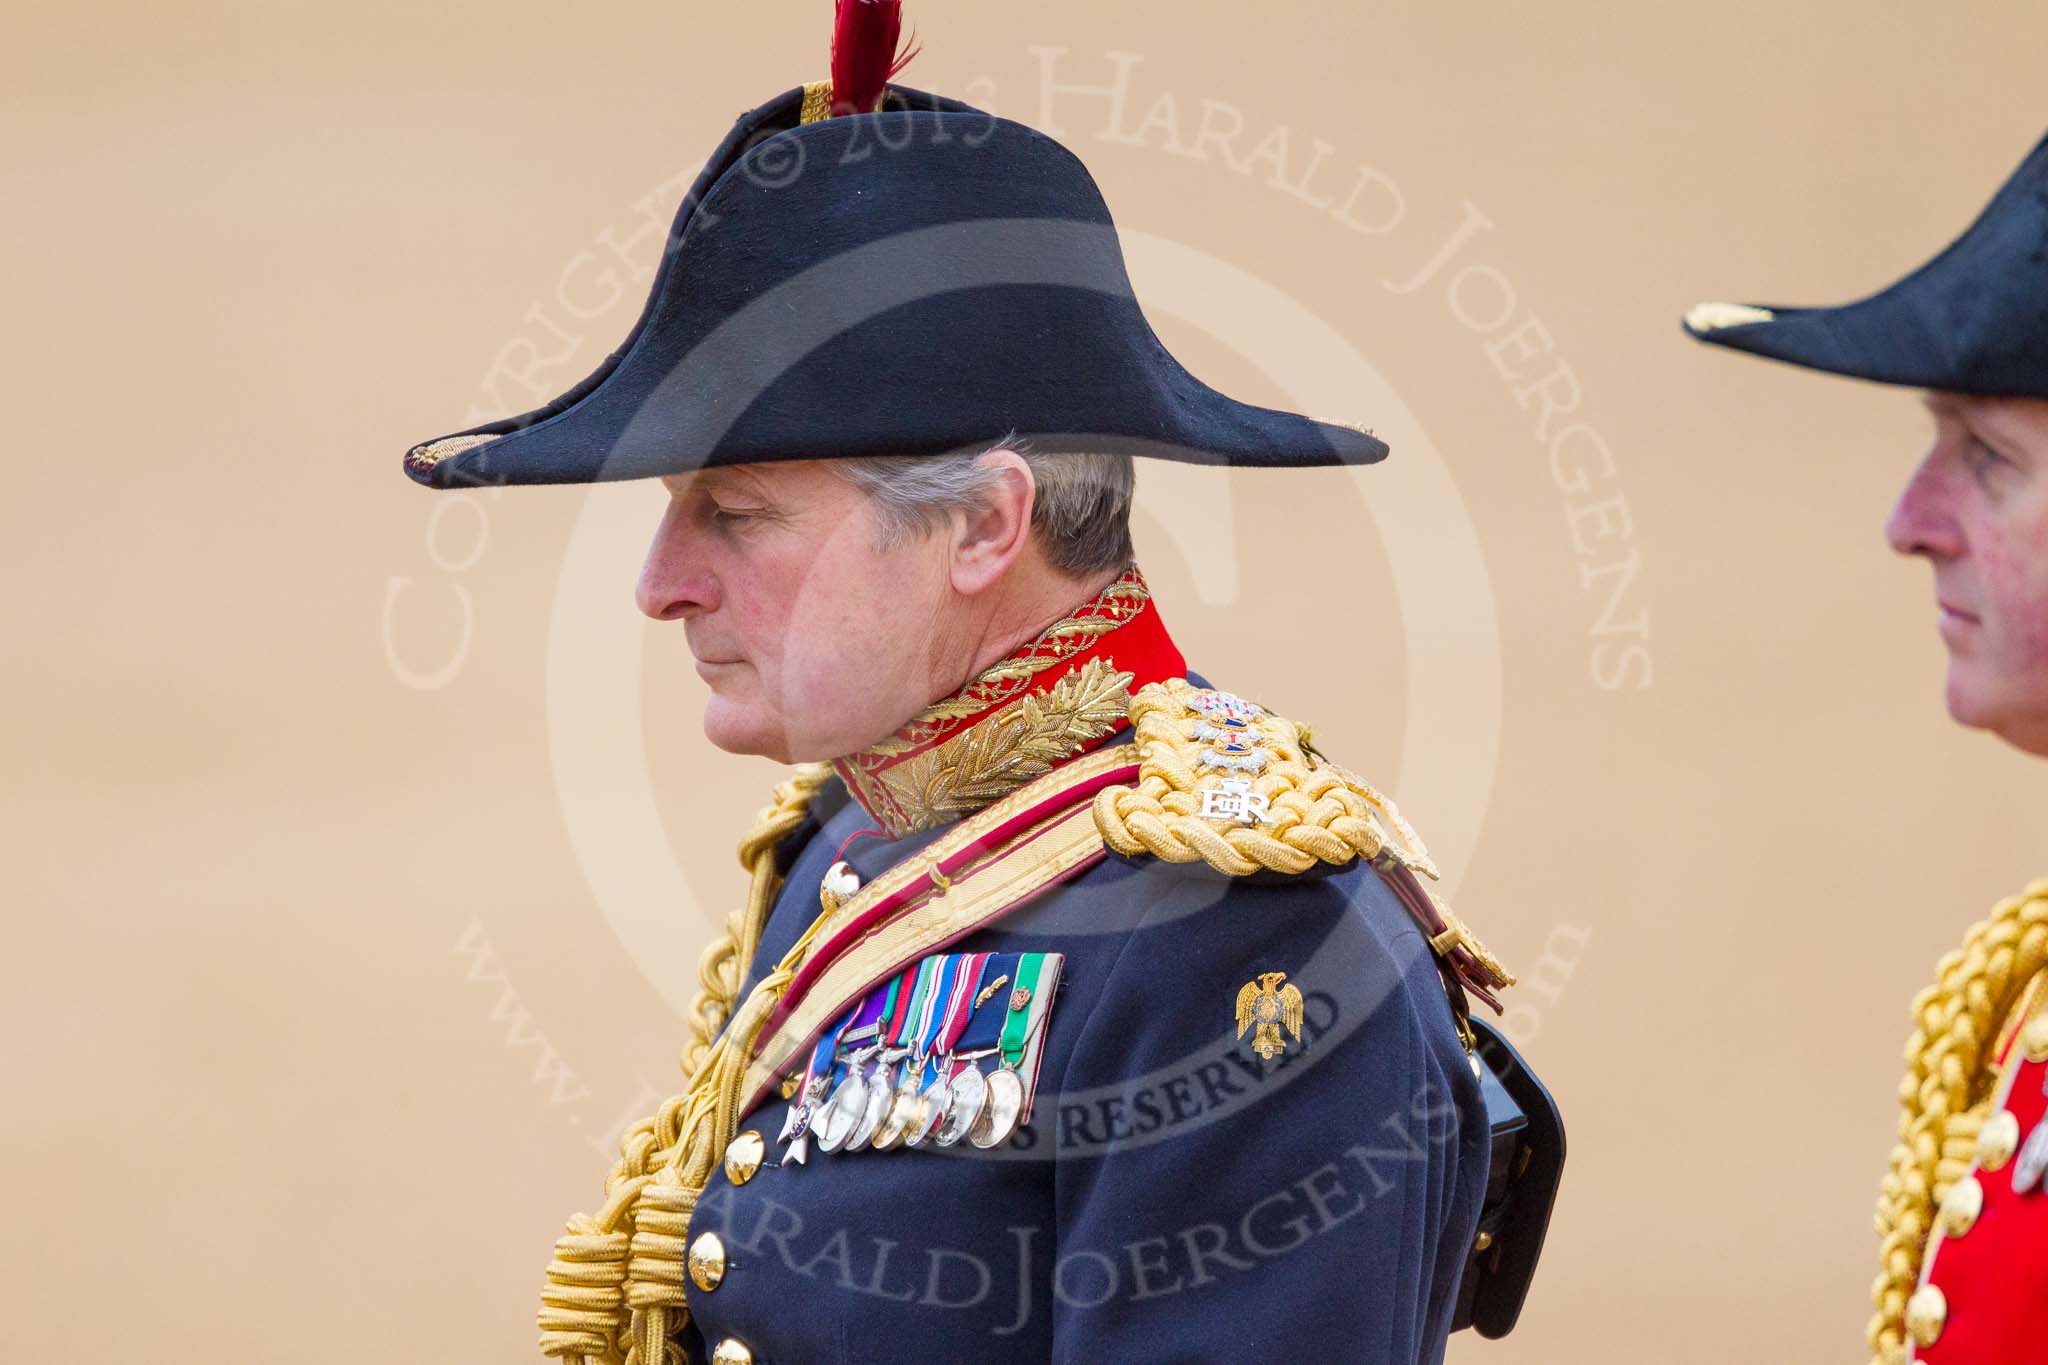 Trooping the Colour 2015. Image #267, 13 June 2015 11:00 Horse Guards Parade, London, UK